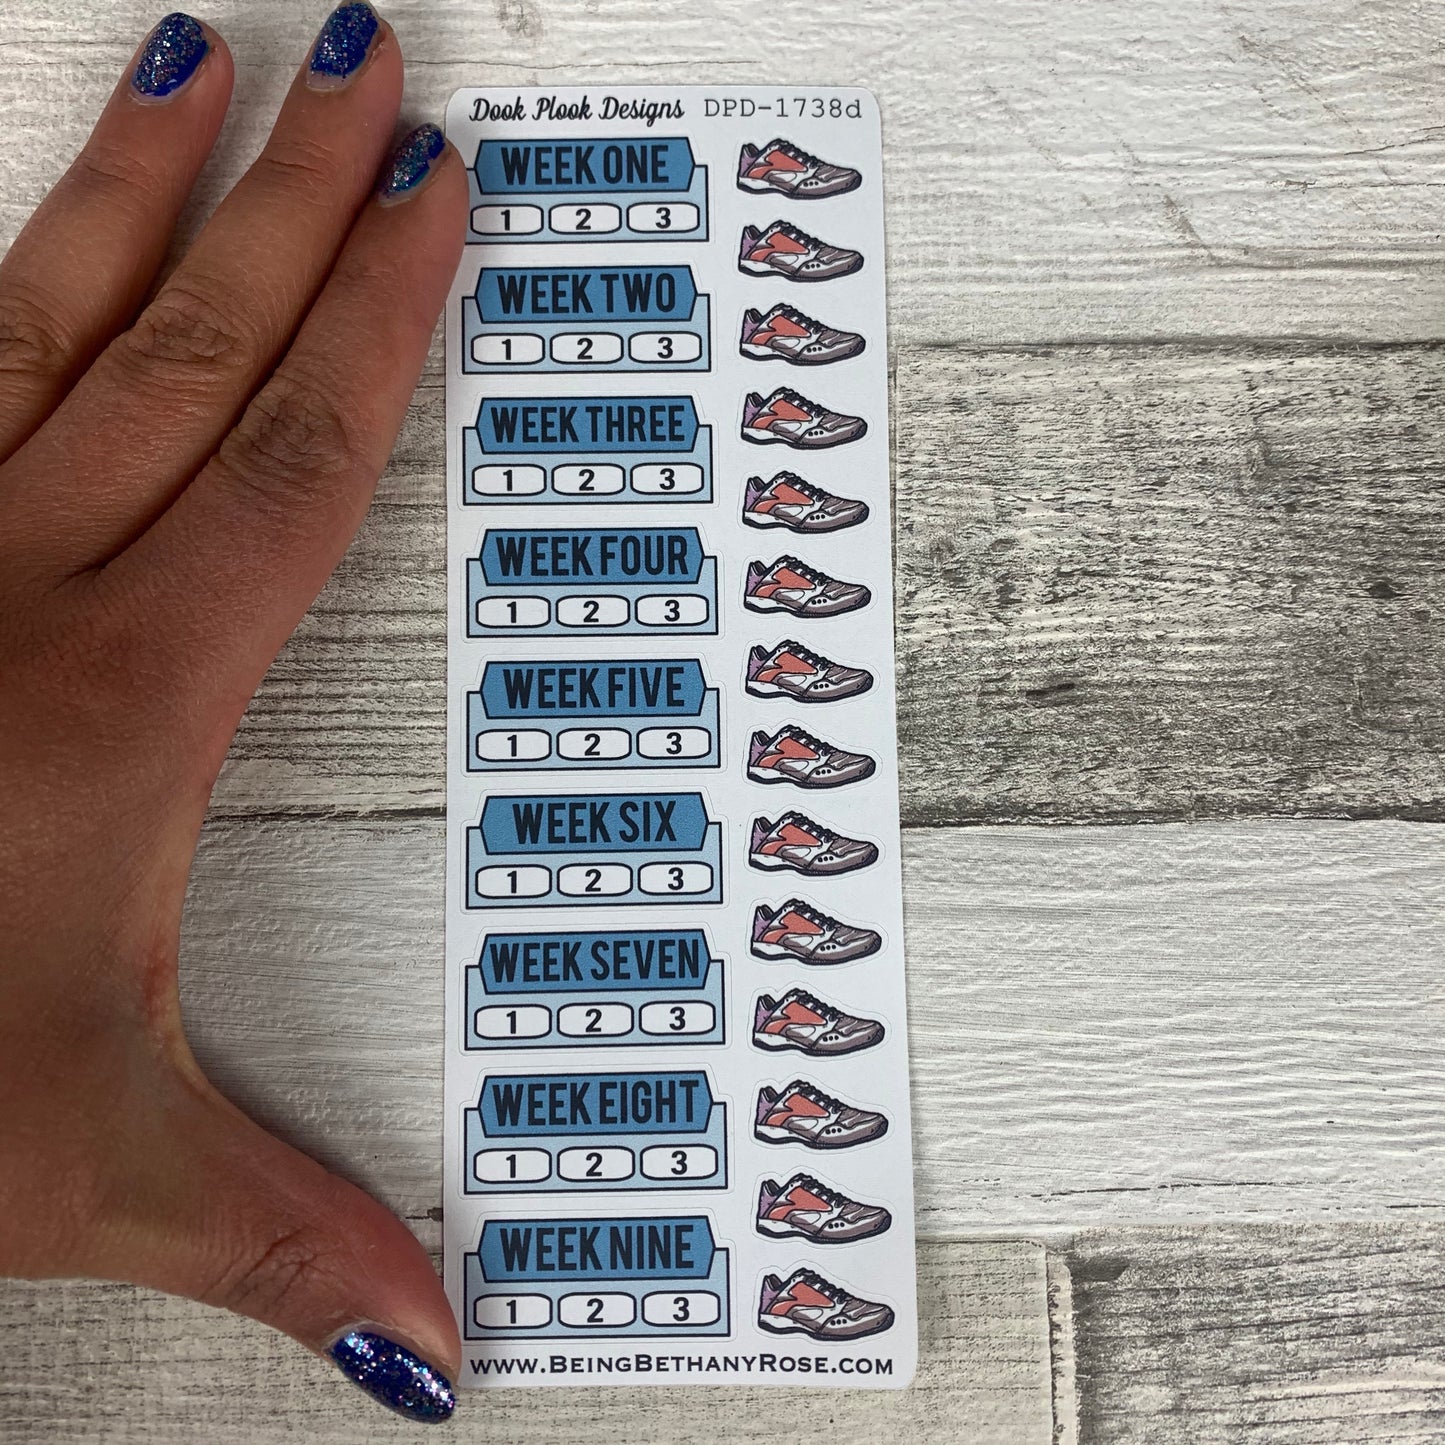 Couch to 5k (C25K) stickers (DPD1738)